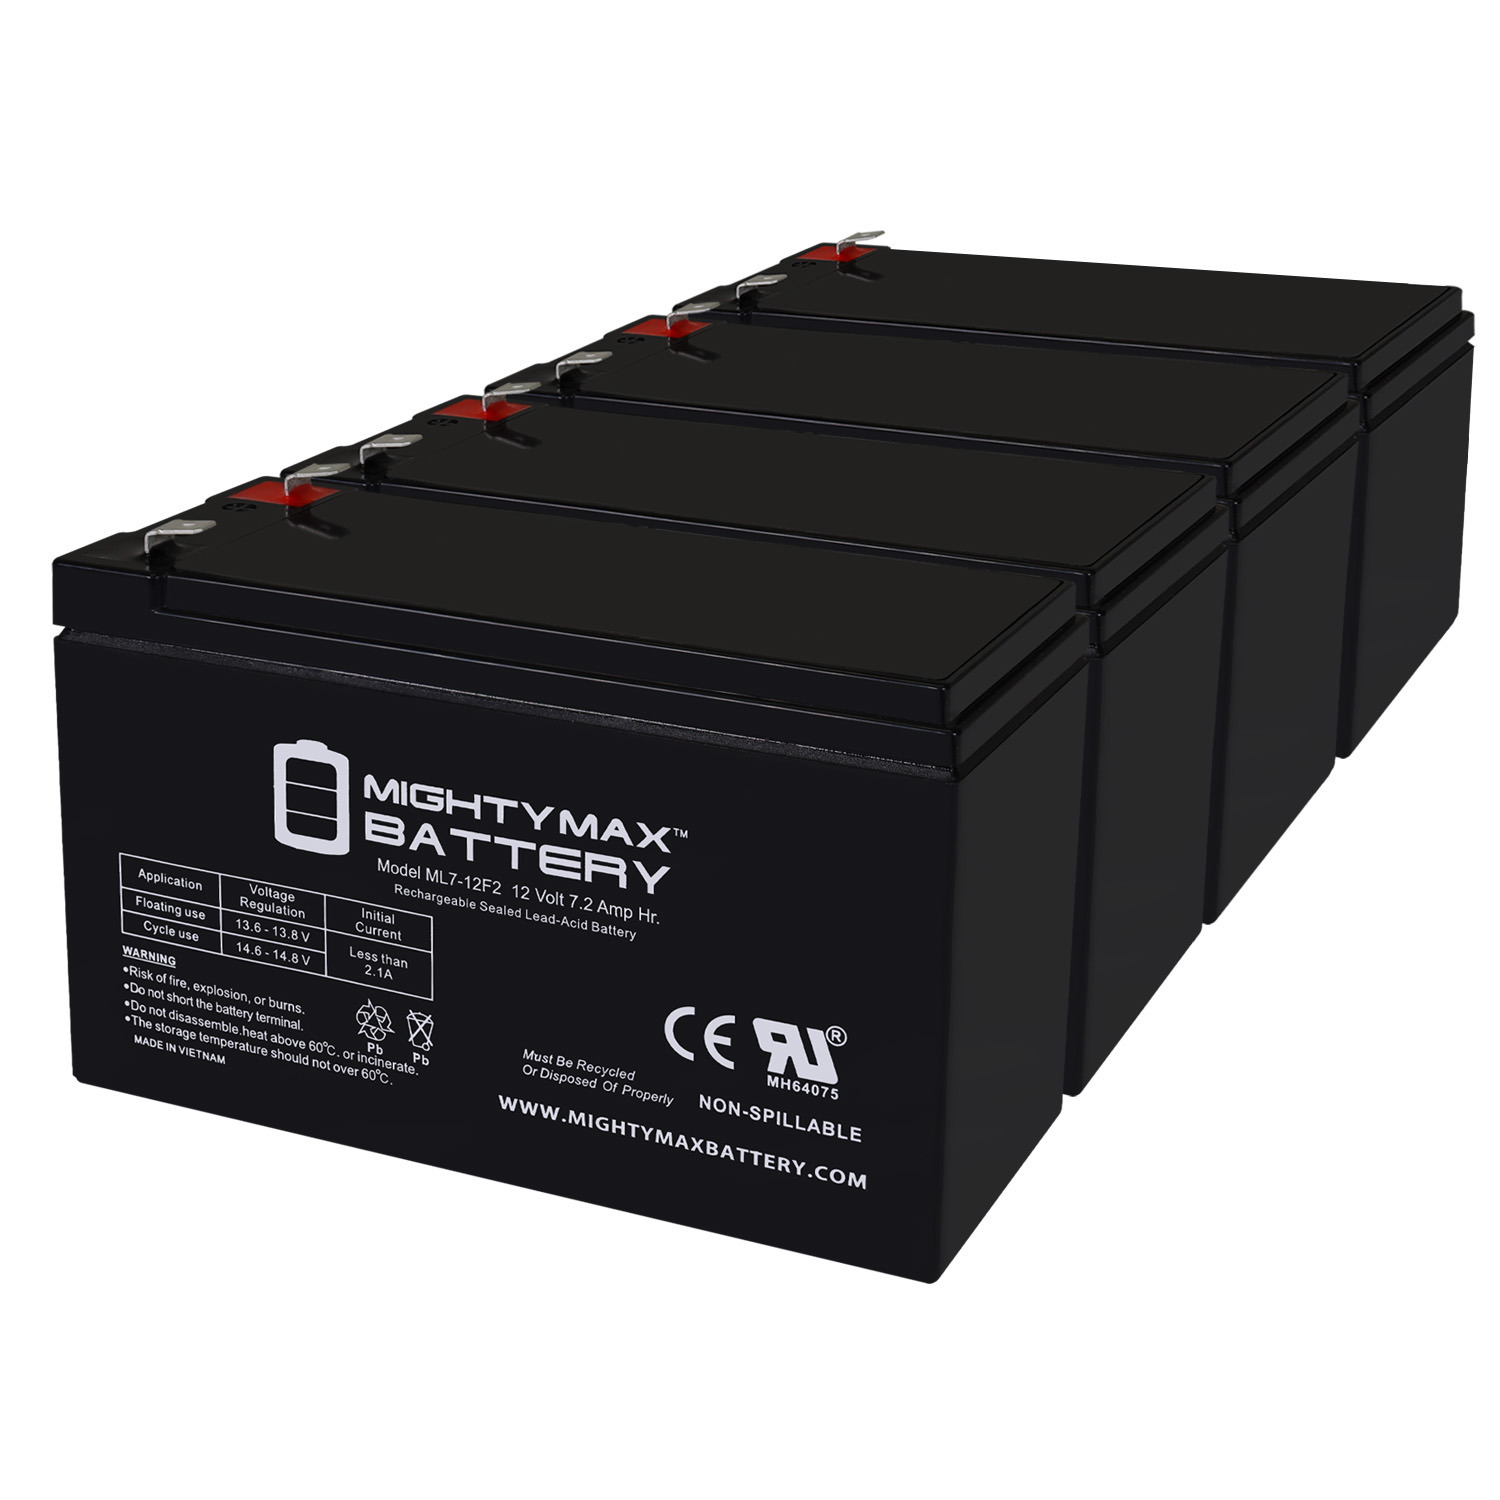 12V 7Ah F2 Replacement Battery for PowerWare PW9120-1000VA - 4 Pack